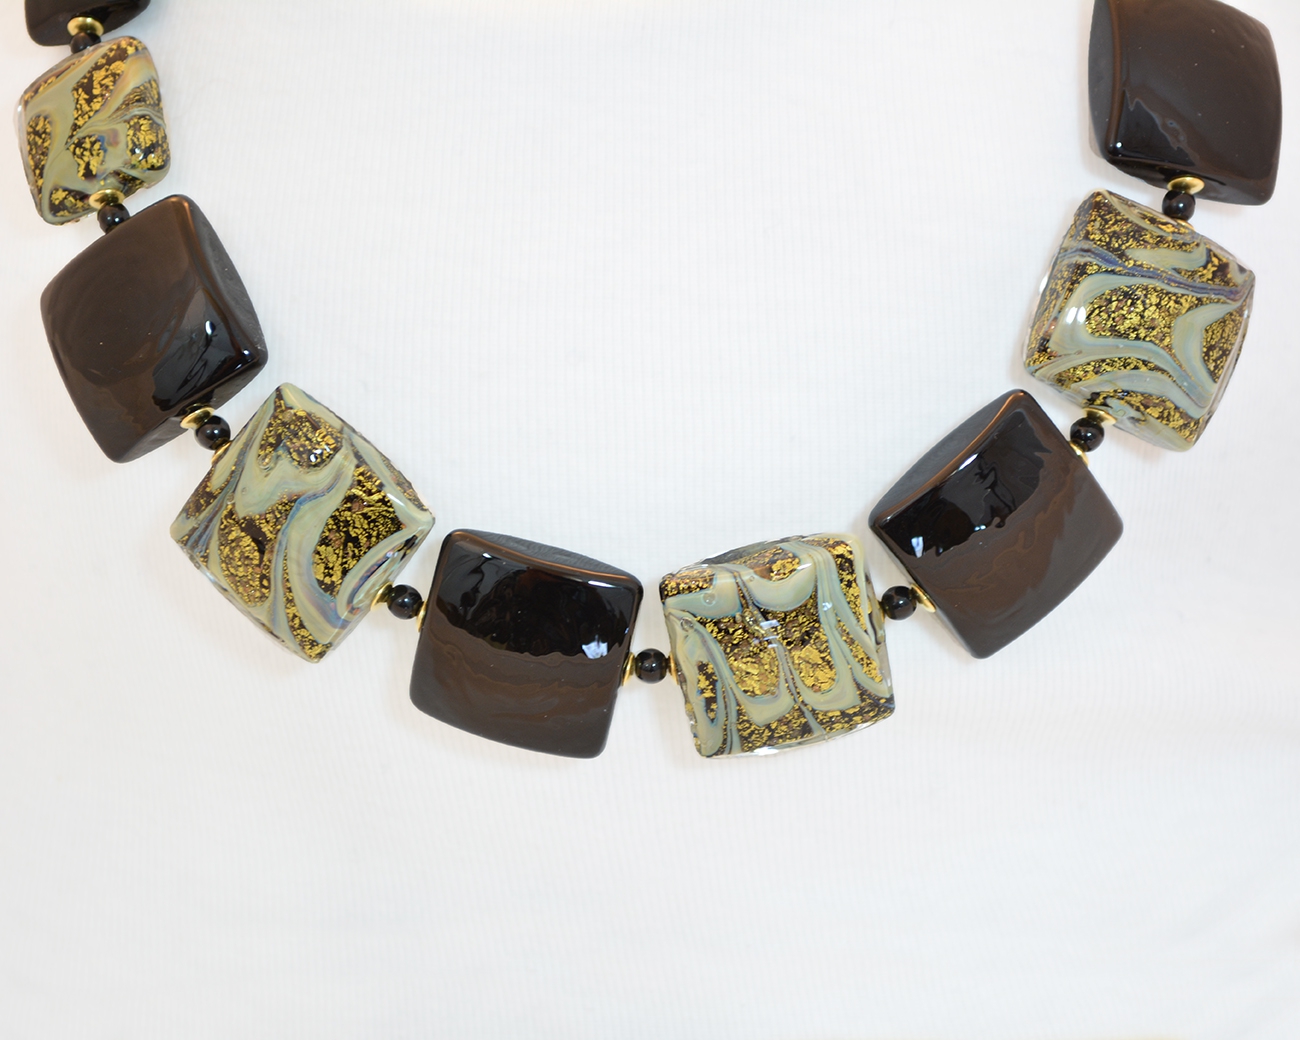 Black and Gold Square Bead Necklace